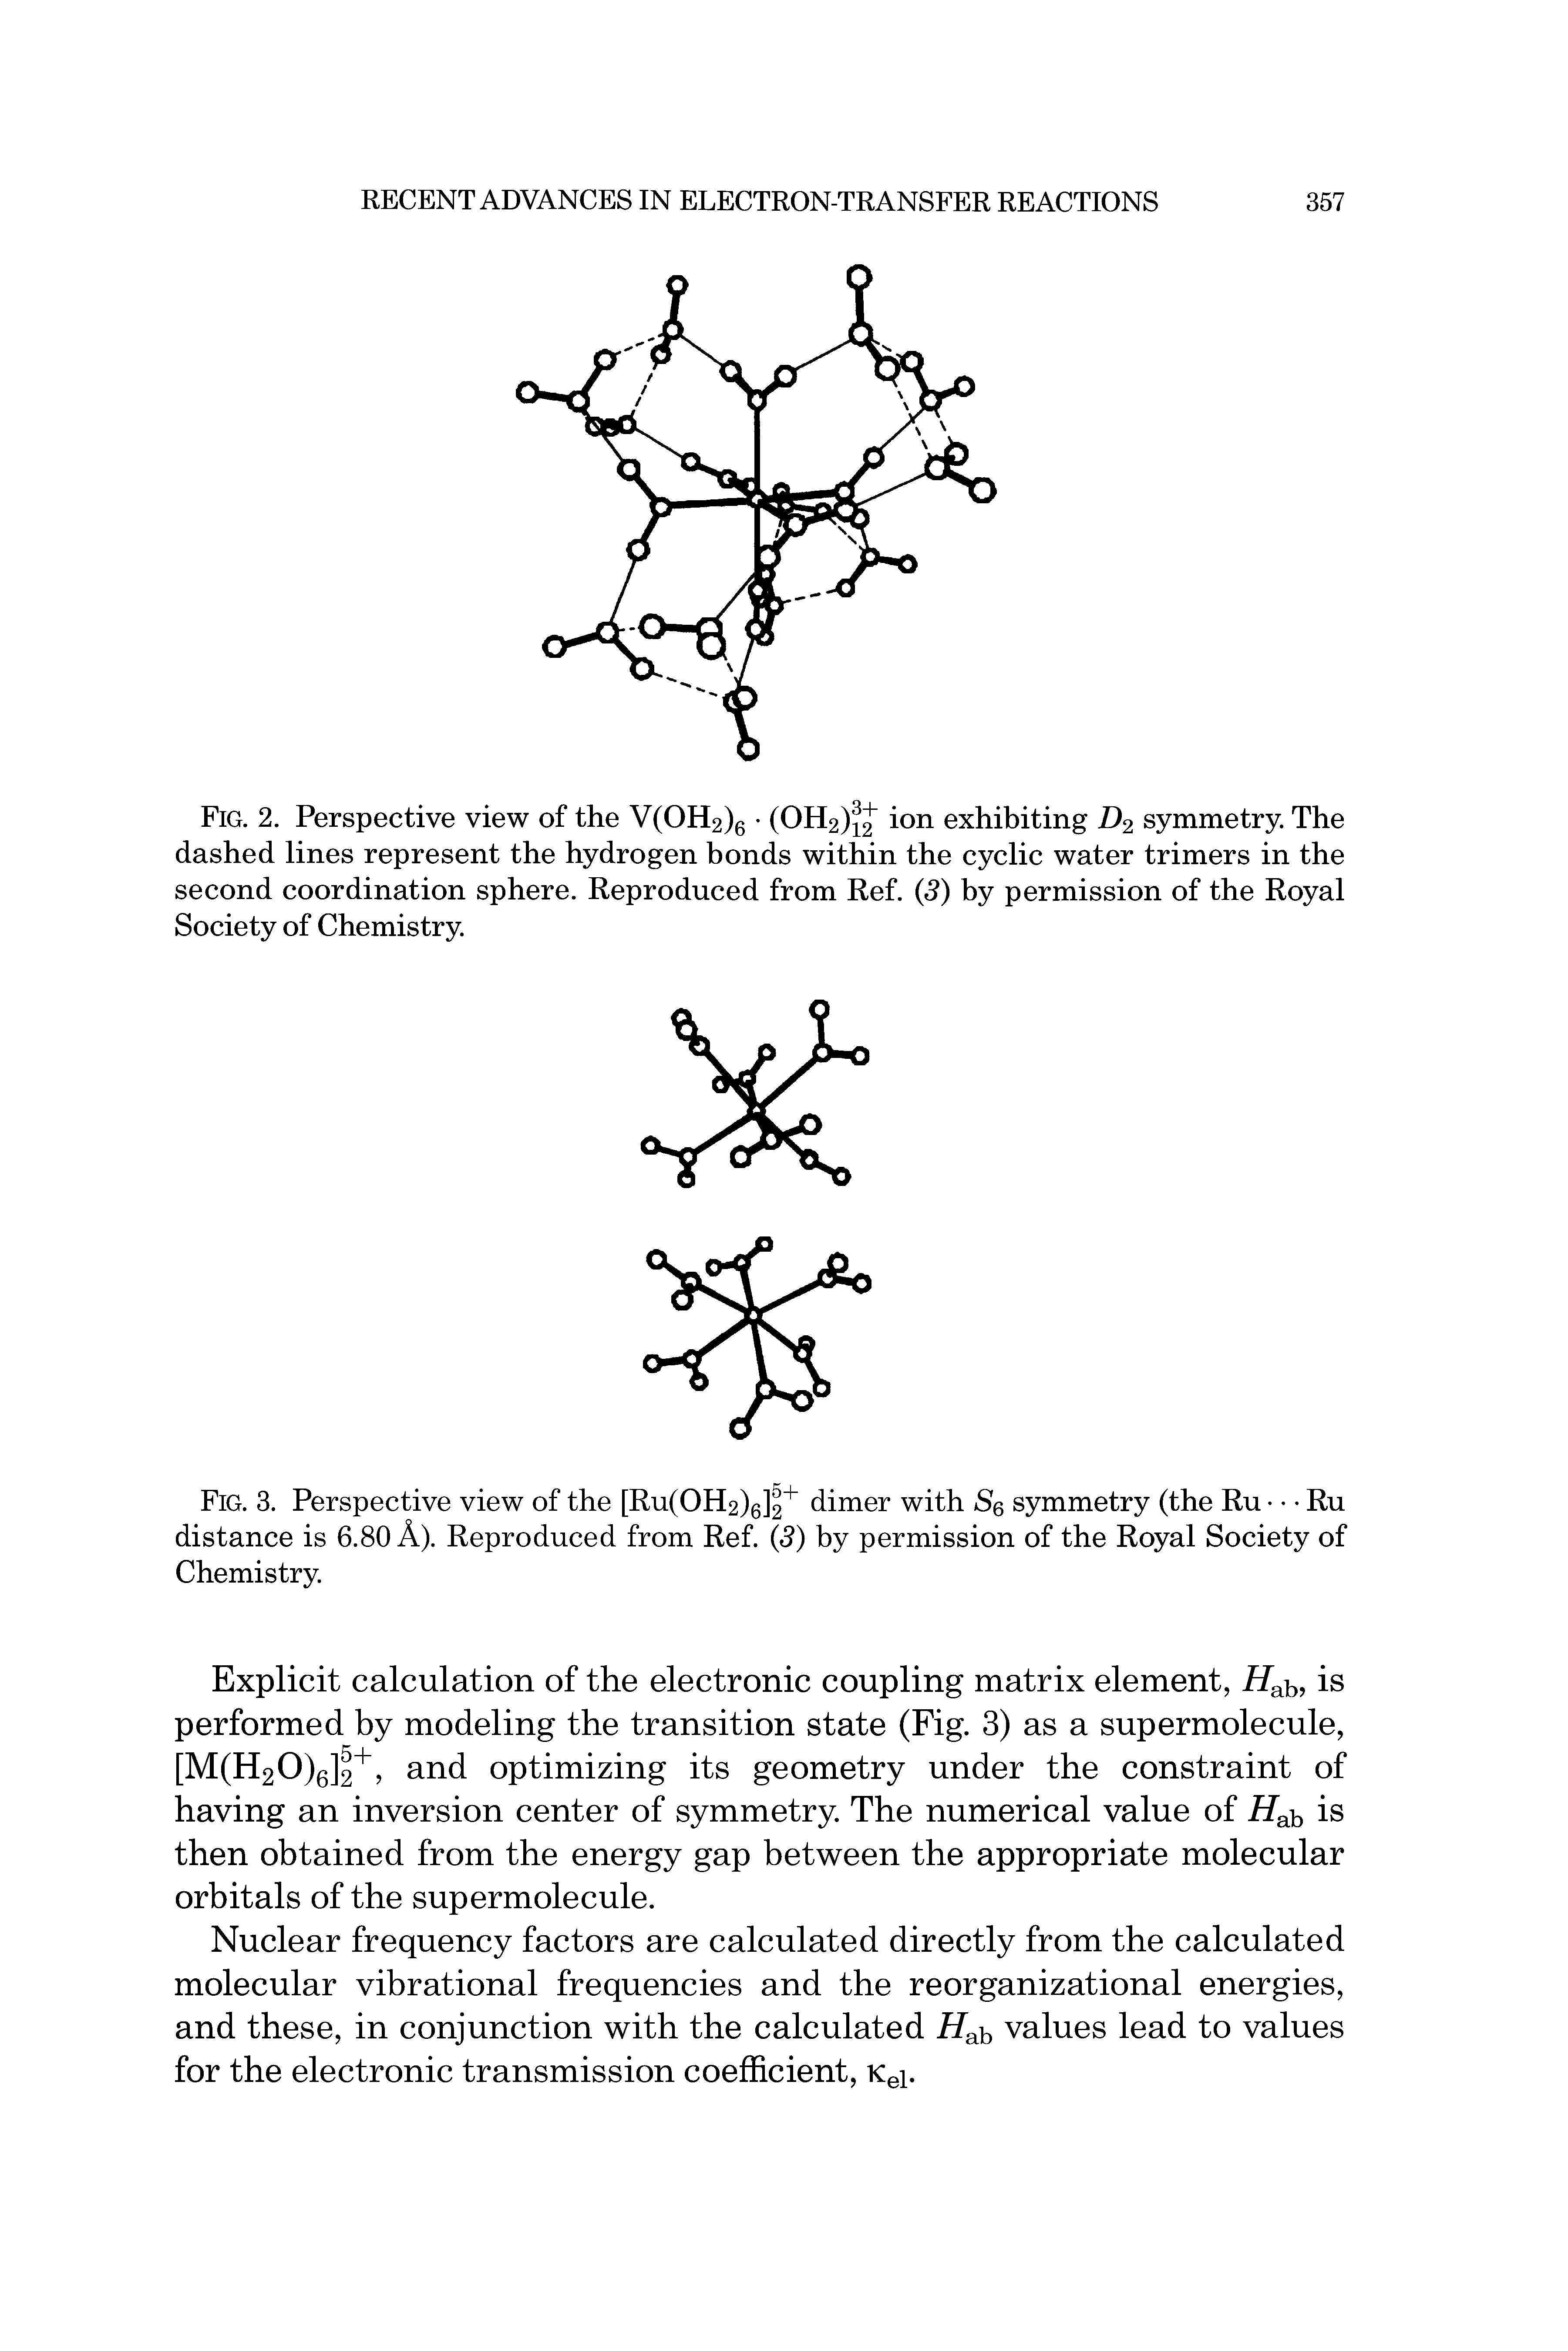 Fig. 2. Perspective view of the V(OH2)6 (OH2)i2 ion exhibiting D2 symmetry. The dashed lines represent the hydrogen bonds within the cyclic water trimers in the second coordination sphere. Reproduced from Ref. (3) by permission of the Royal Society of Chemistry.